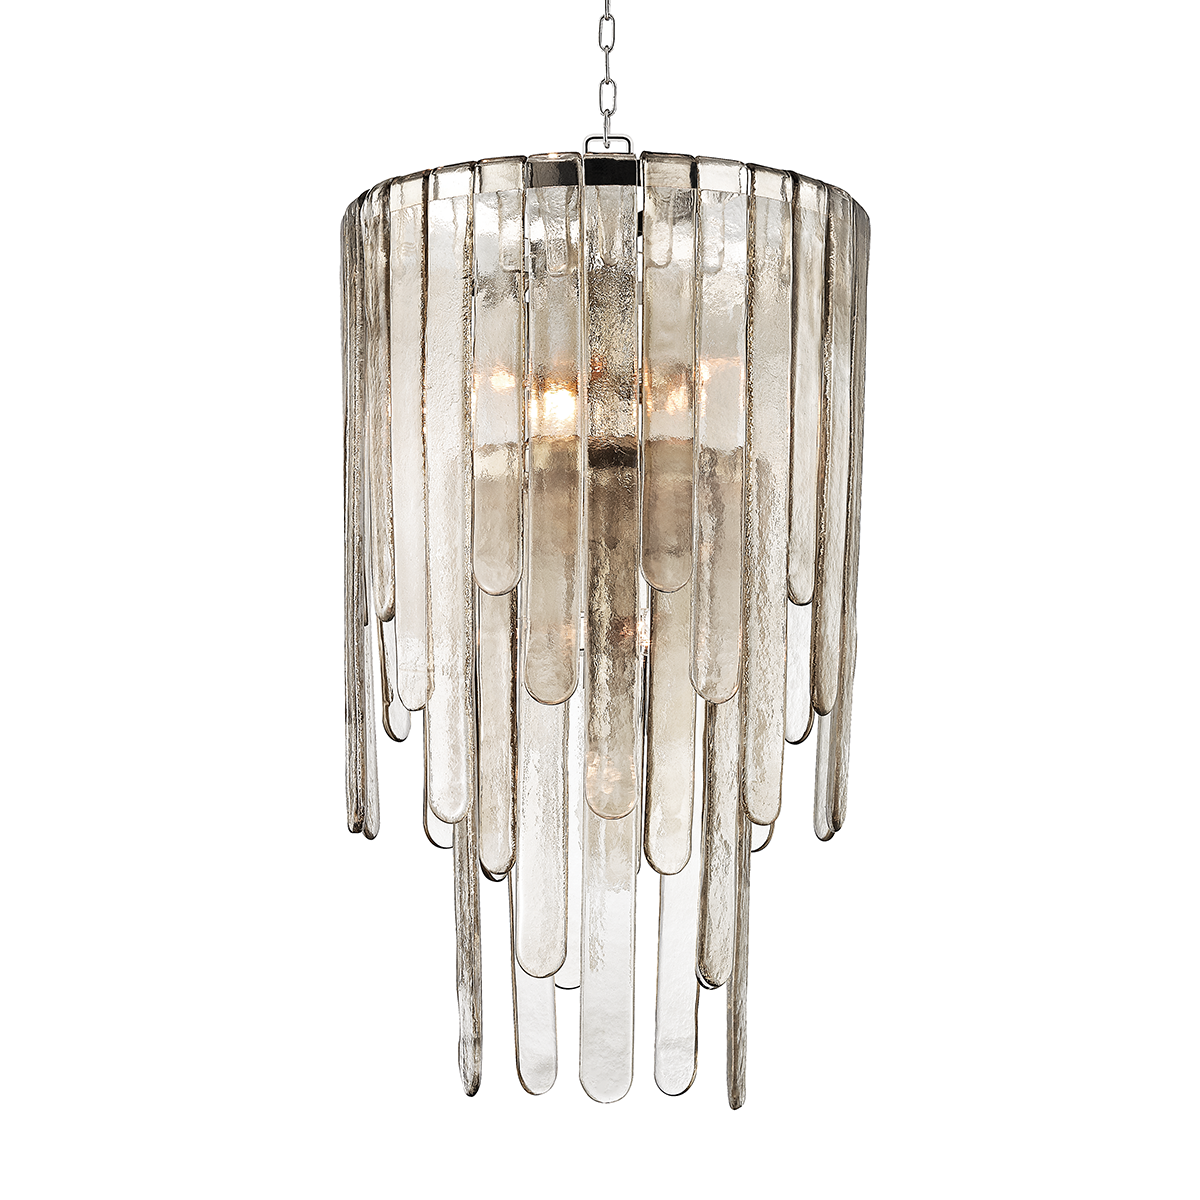 Hudson Valley Lighting Fenwater Pendant Light with Light Bronze Glass and 9 Lights